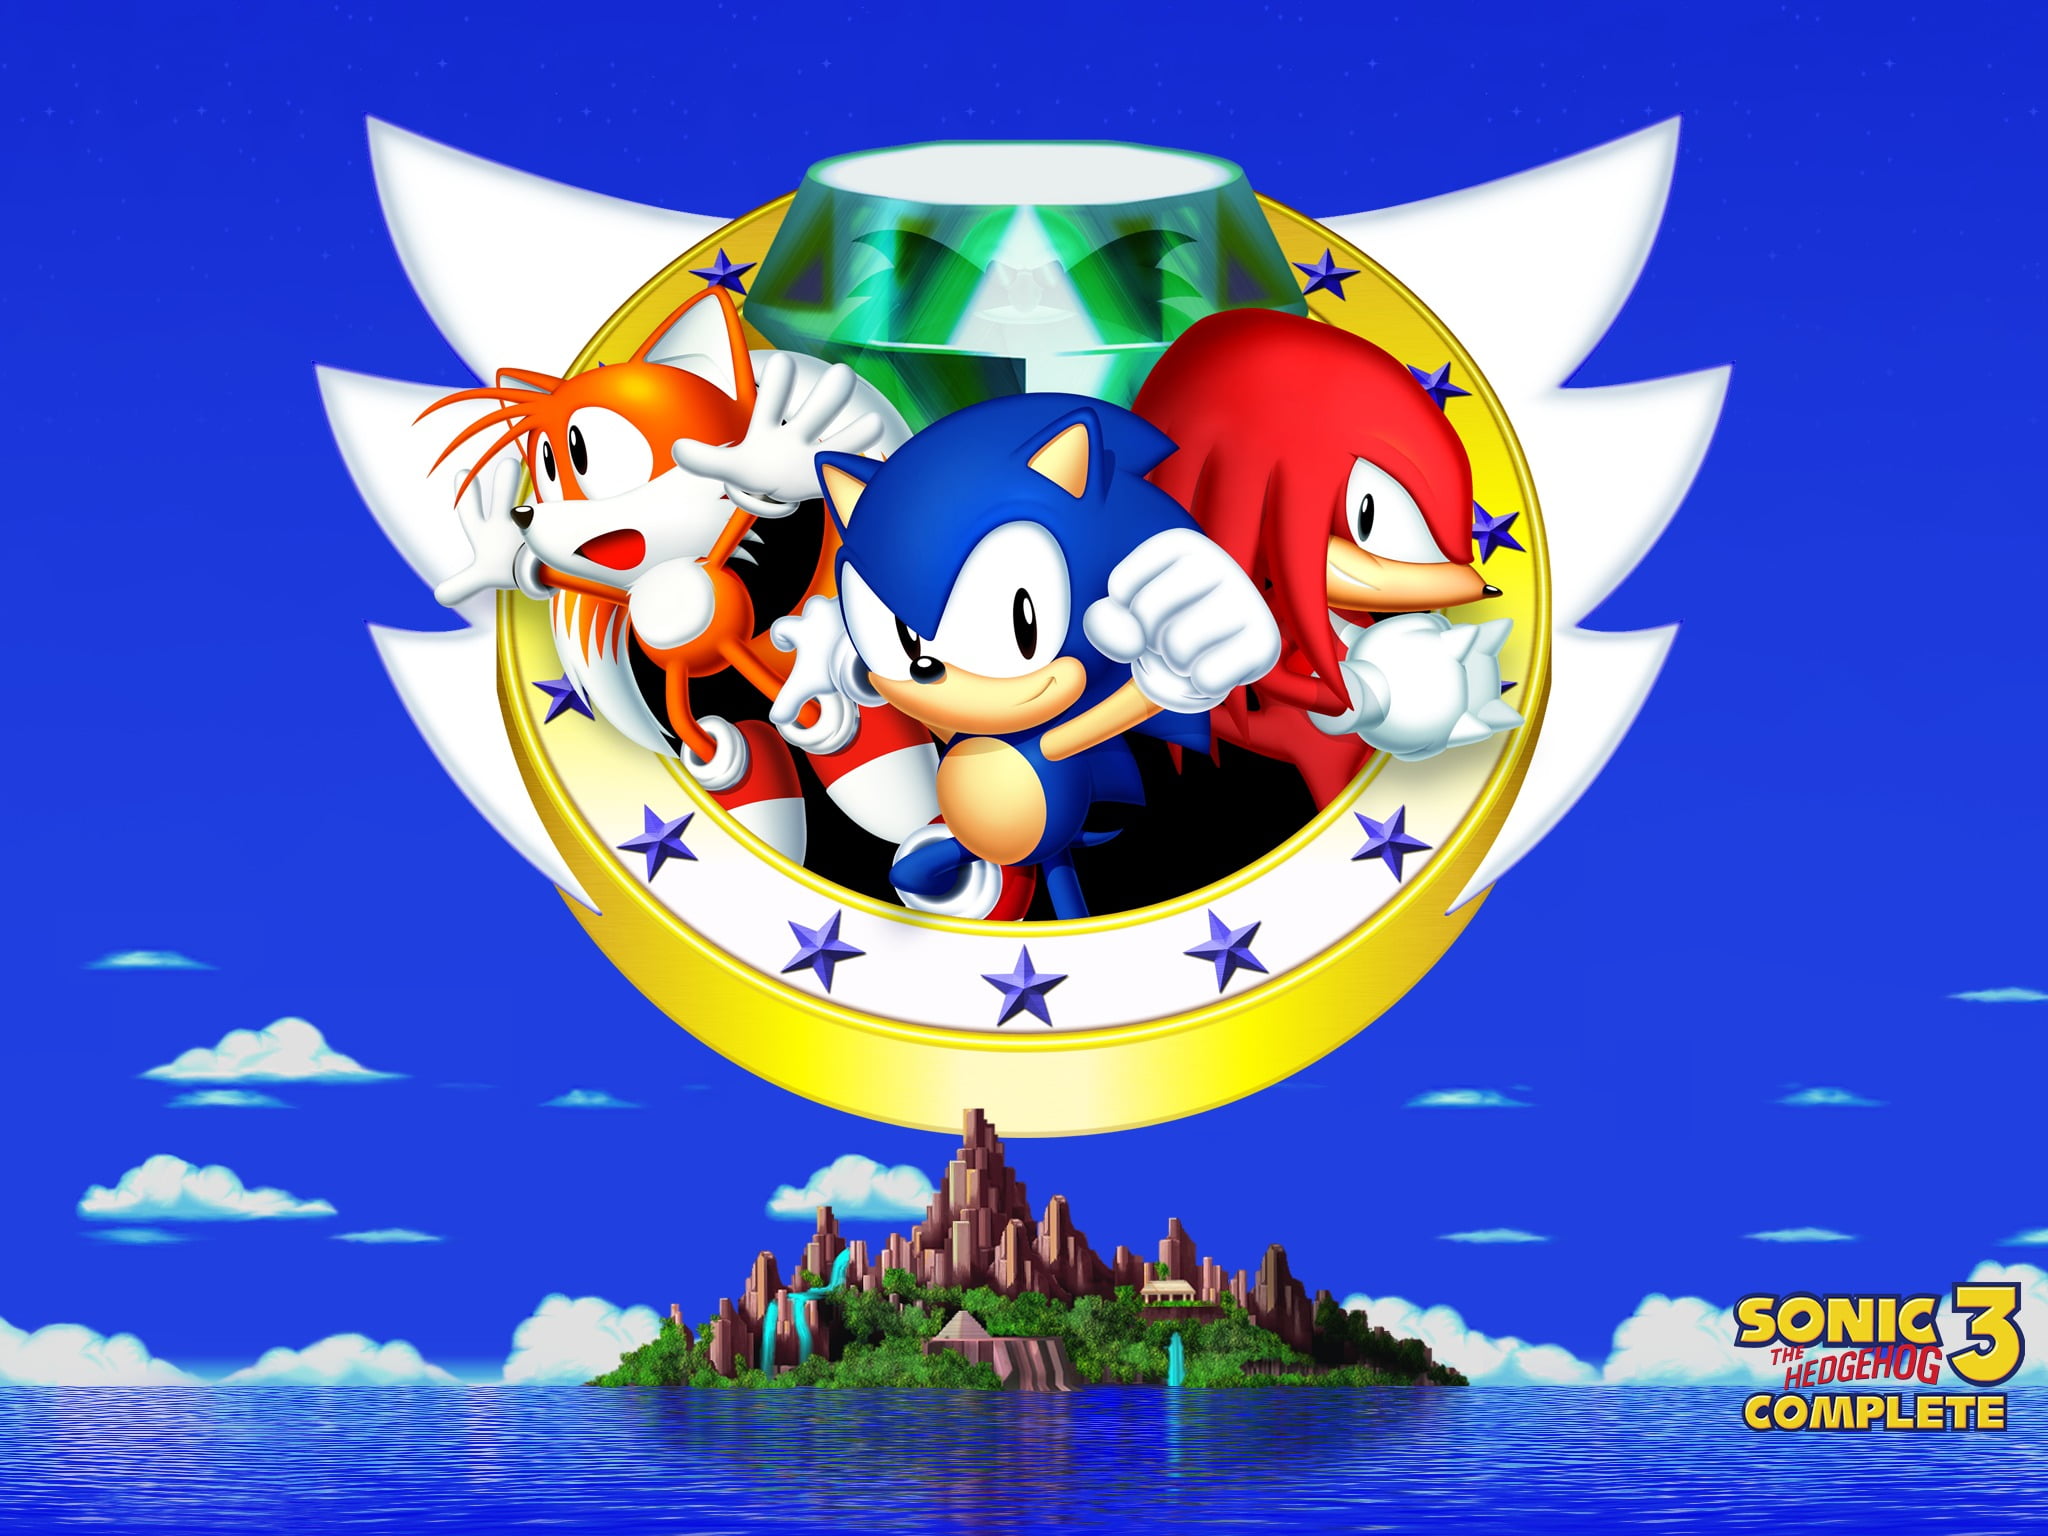 Sonic, Tails (character), Knuckles, water, nature, sky, representation